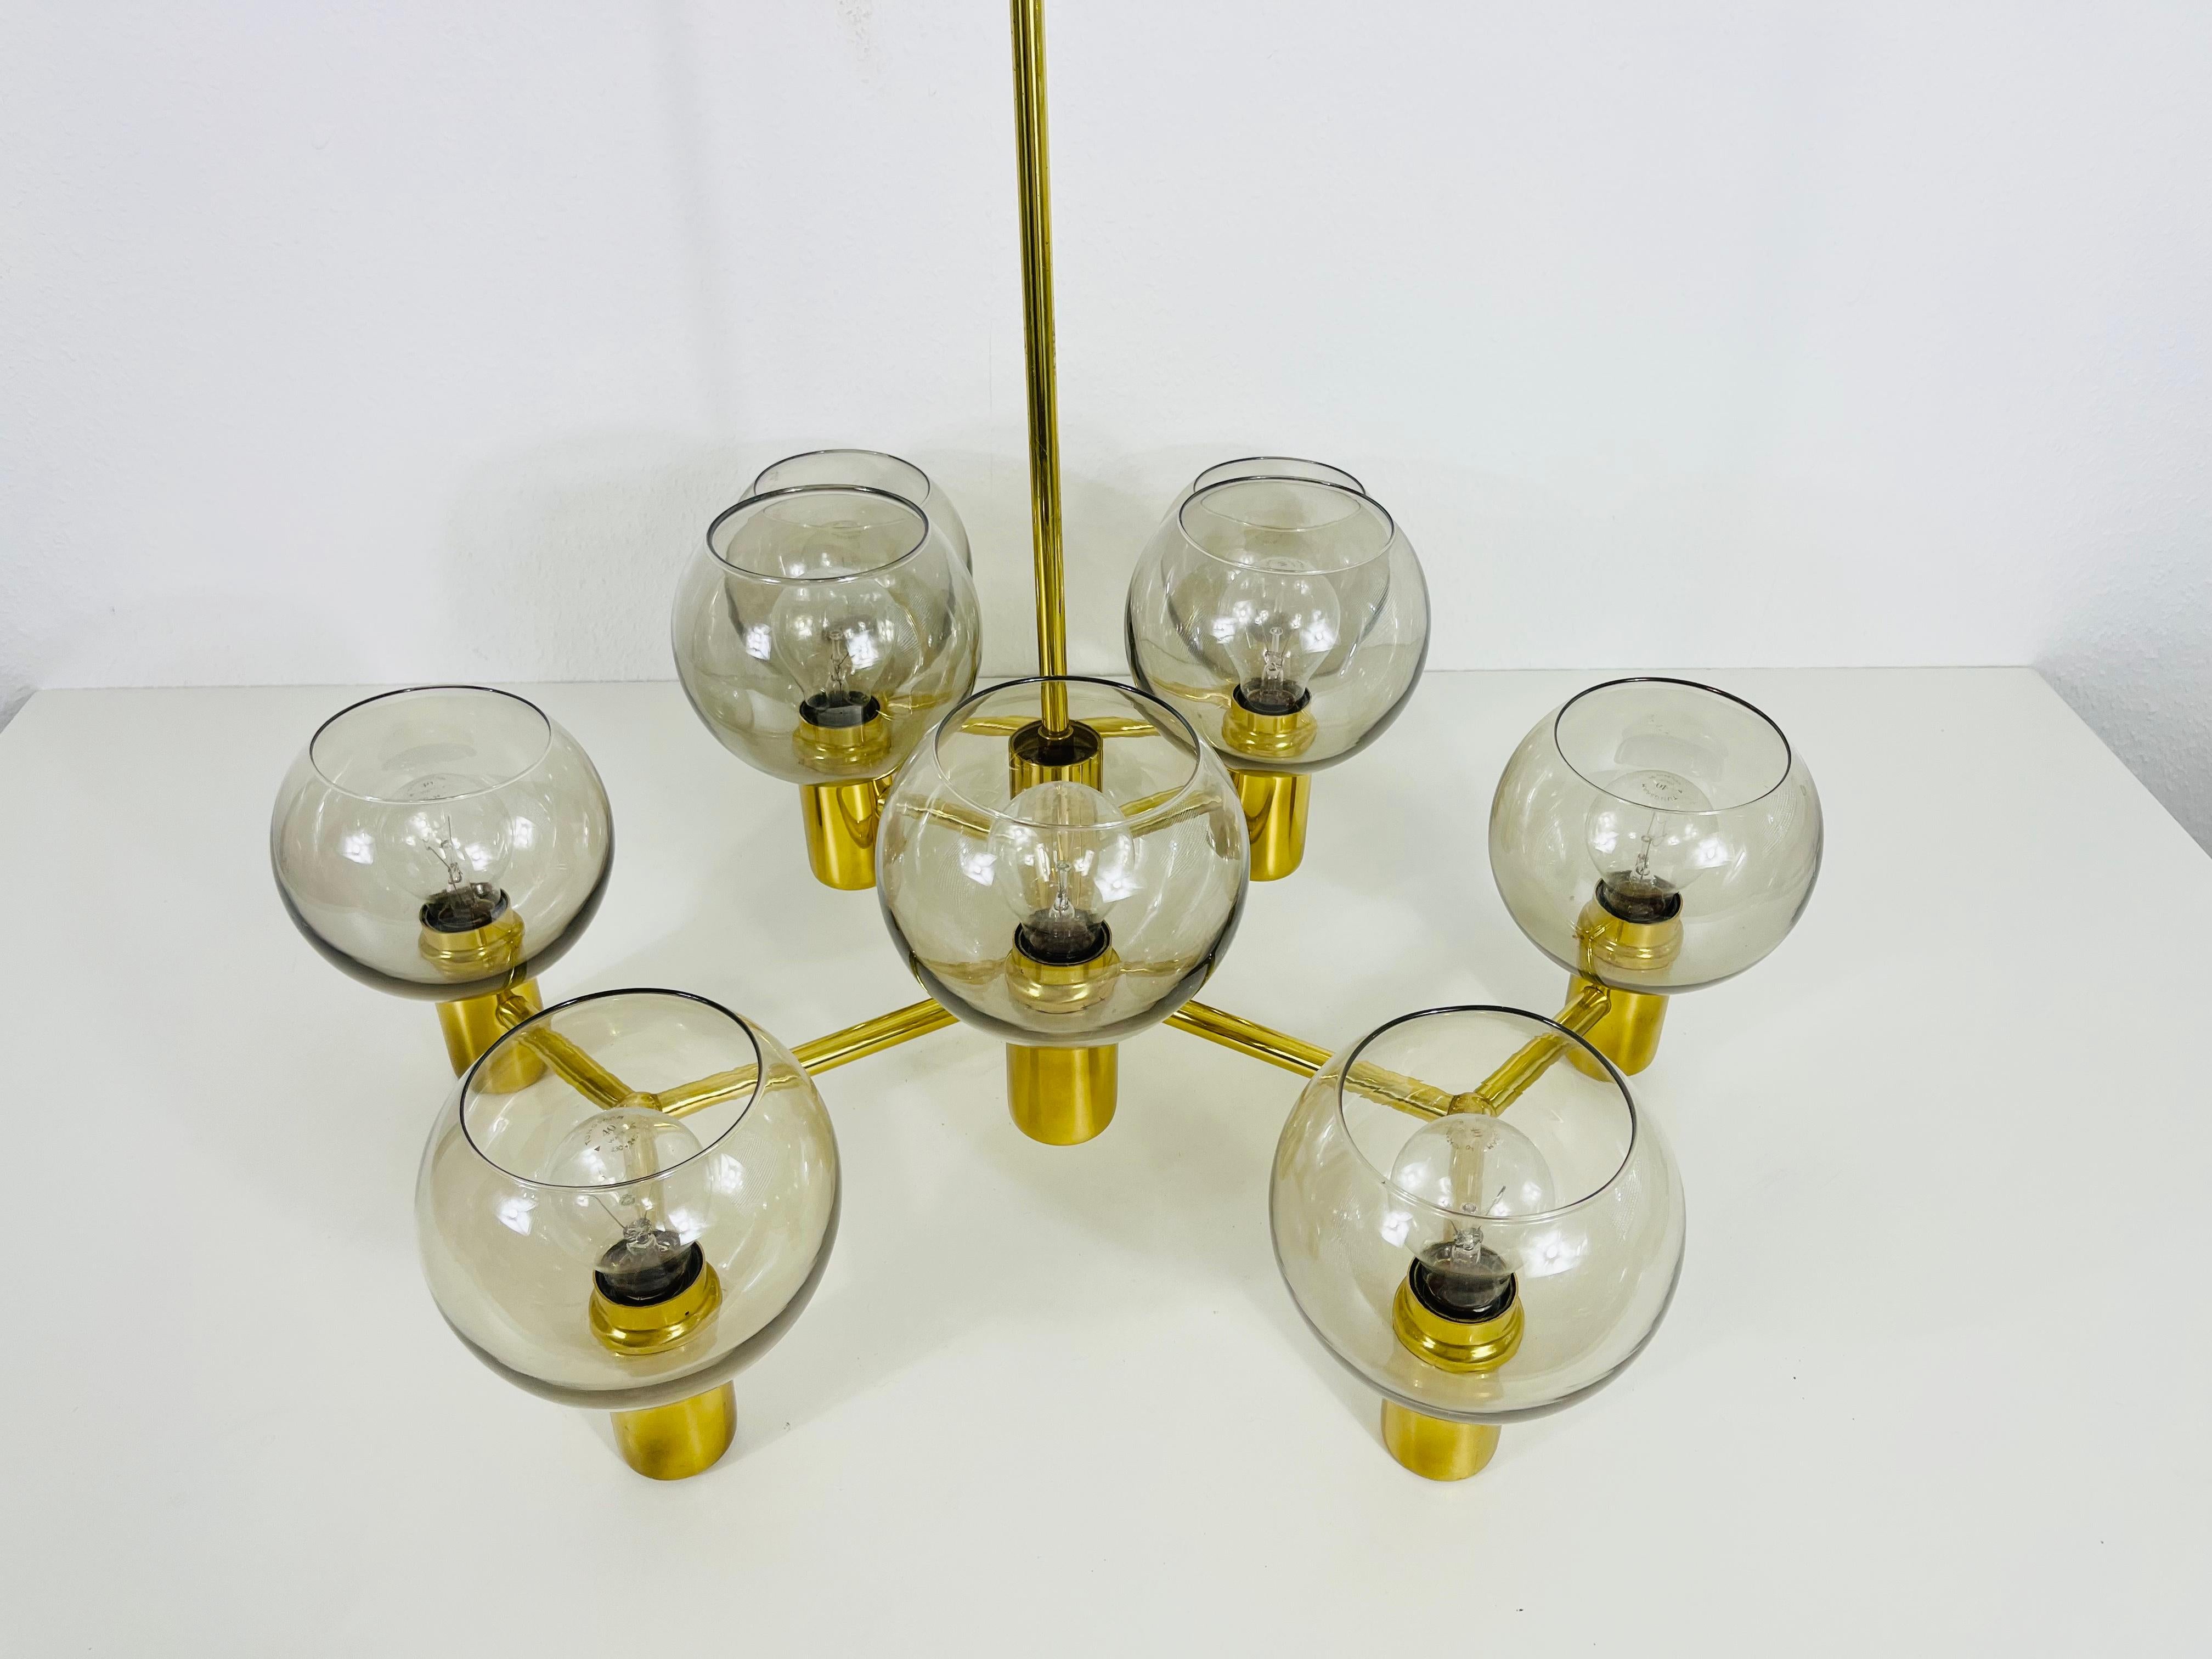 Monumental Swedish Mid-Century Modern Brass and Glass Chandelier, 1960s For Sale 2